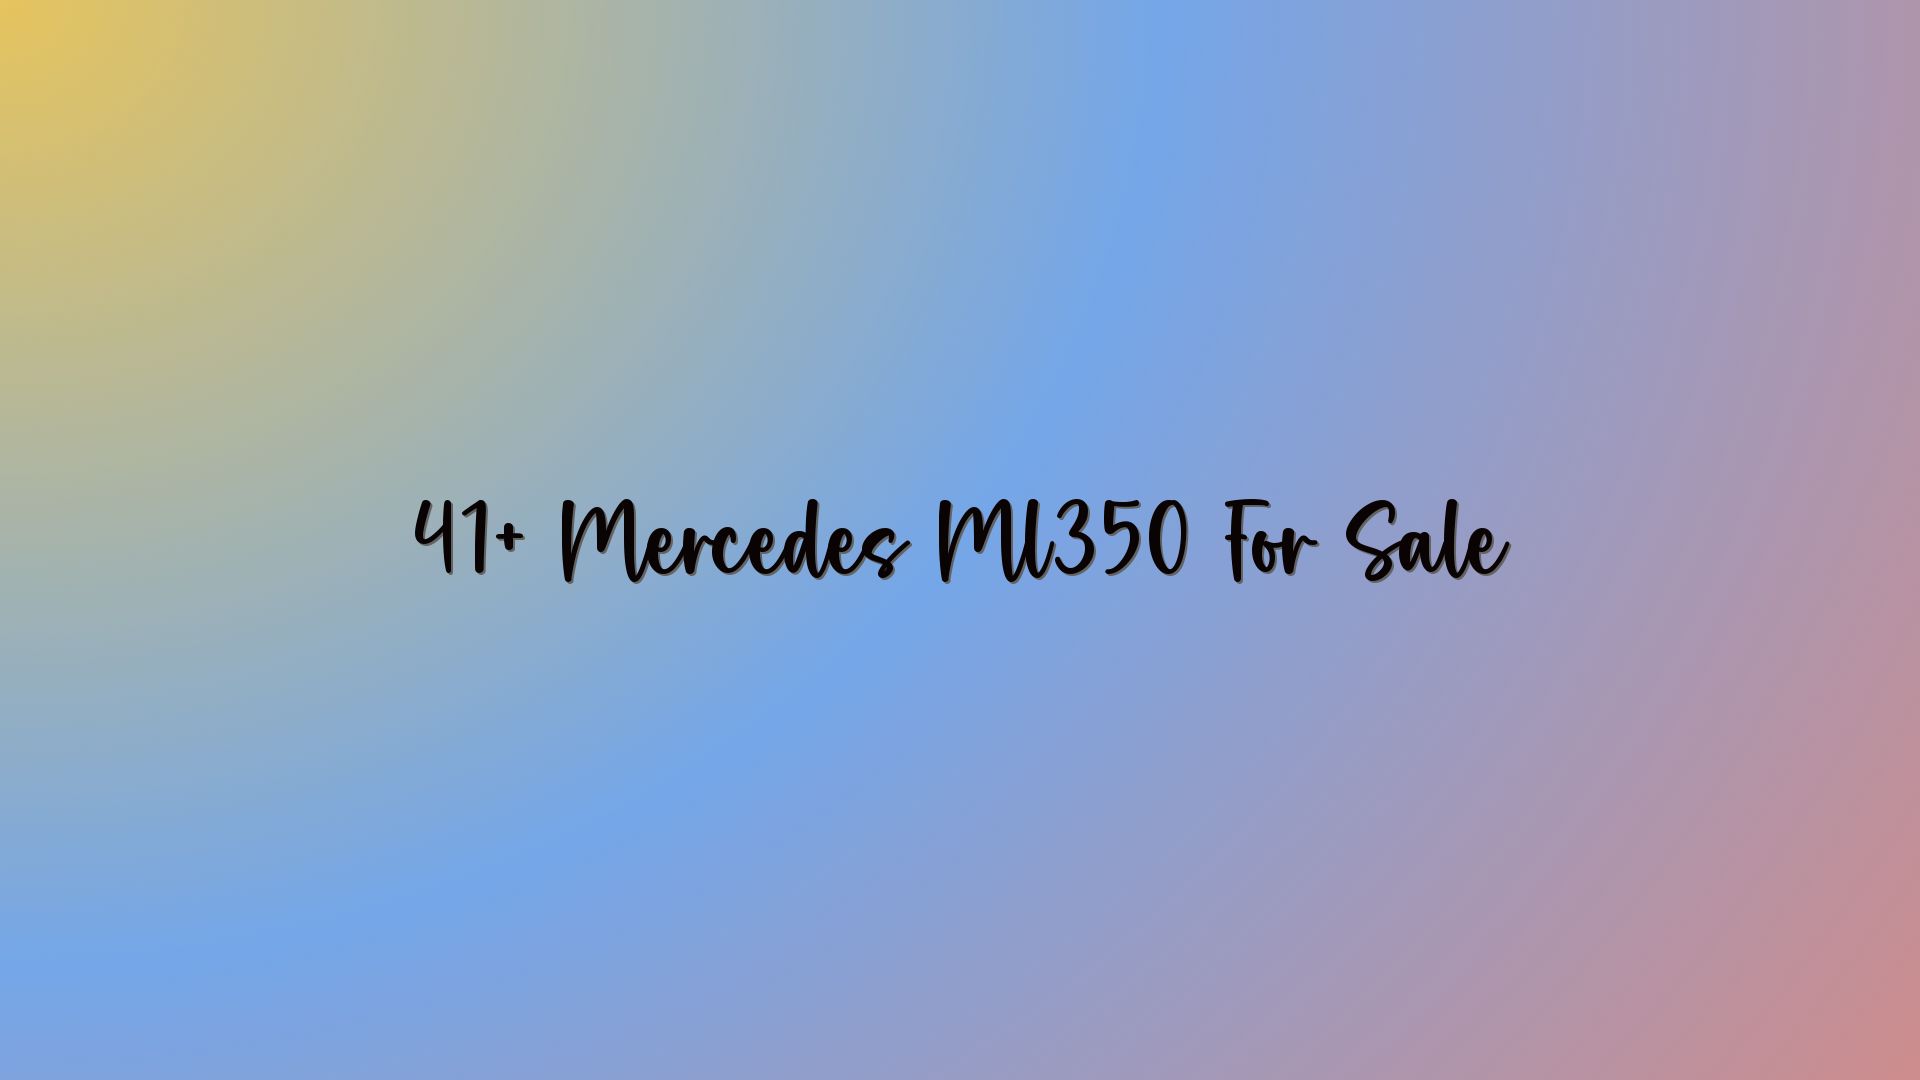 41+ Mercedes Ml350 For Sale